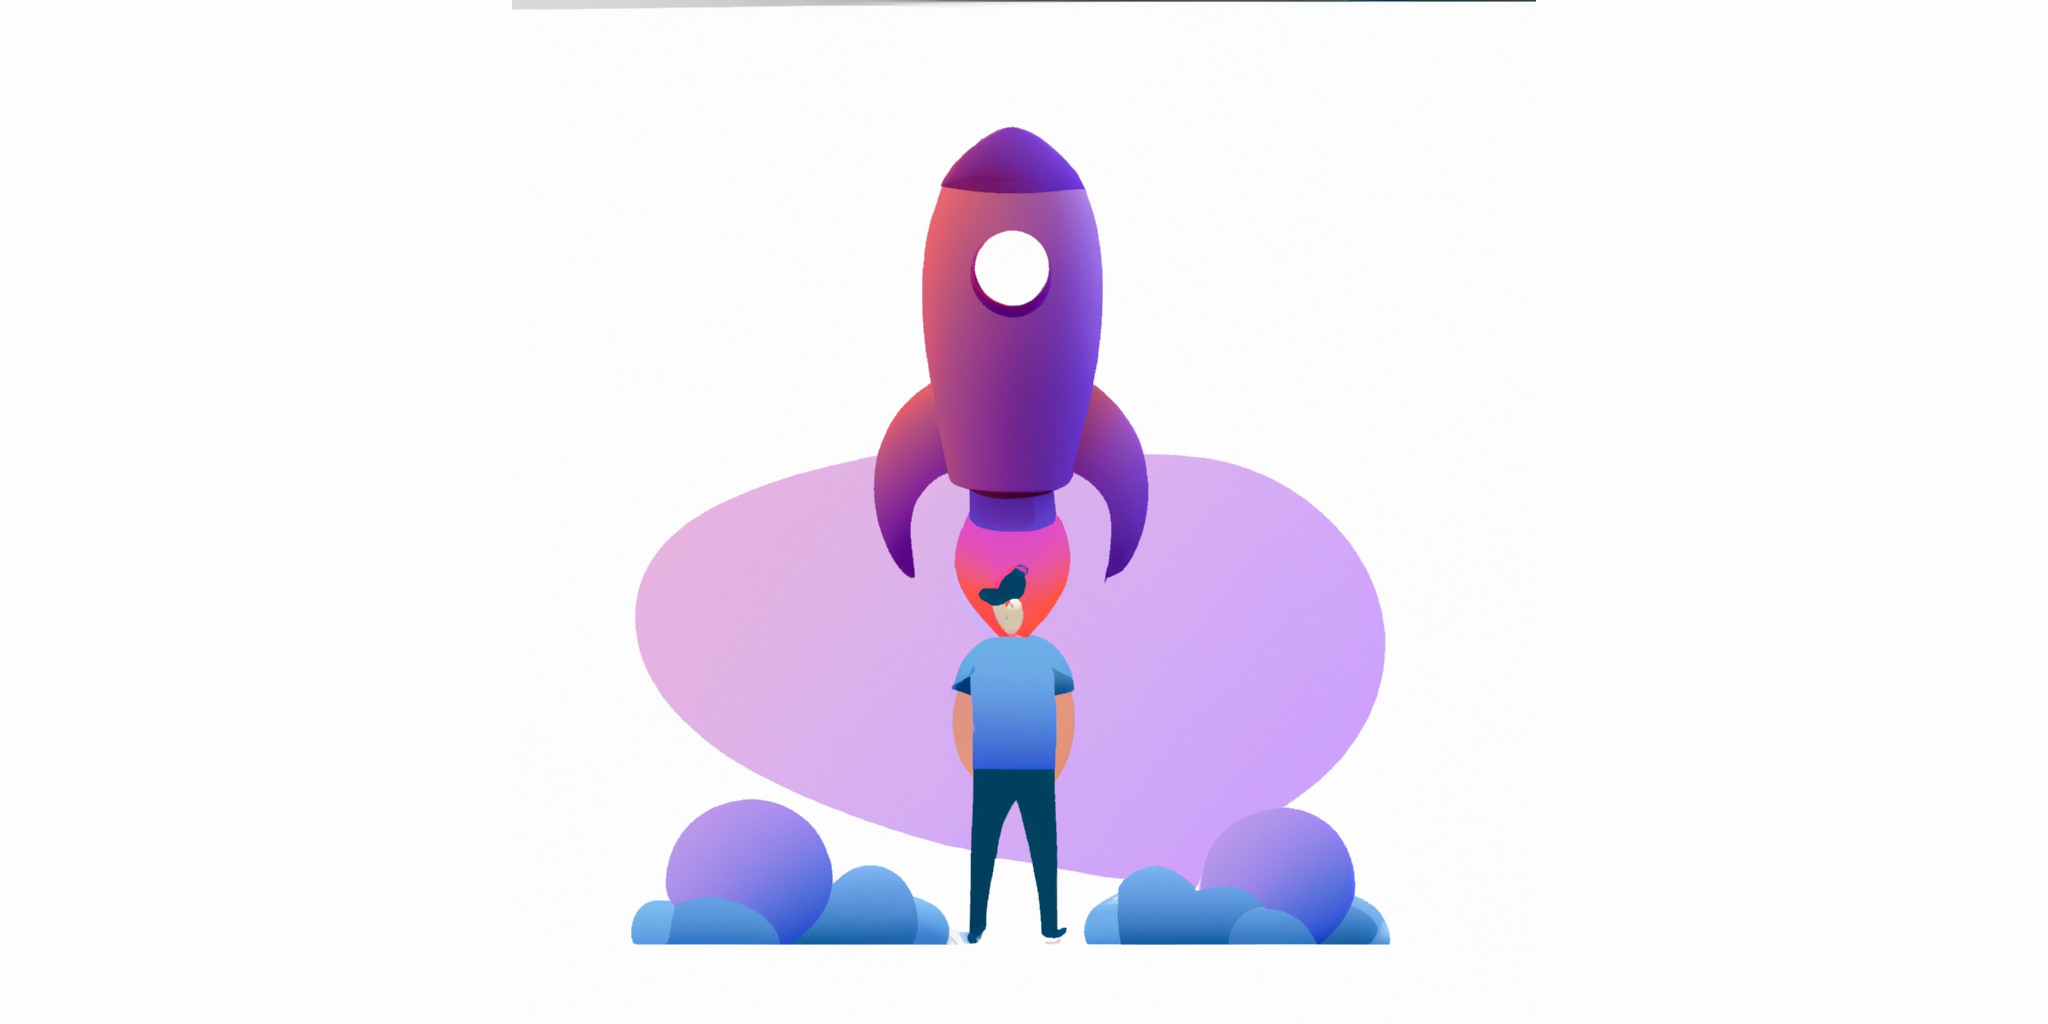 a rocket with a person in front in flat illustration style with gradients and white background